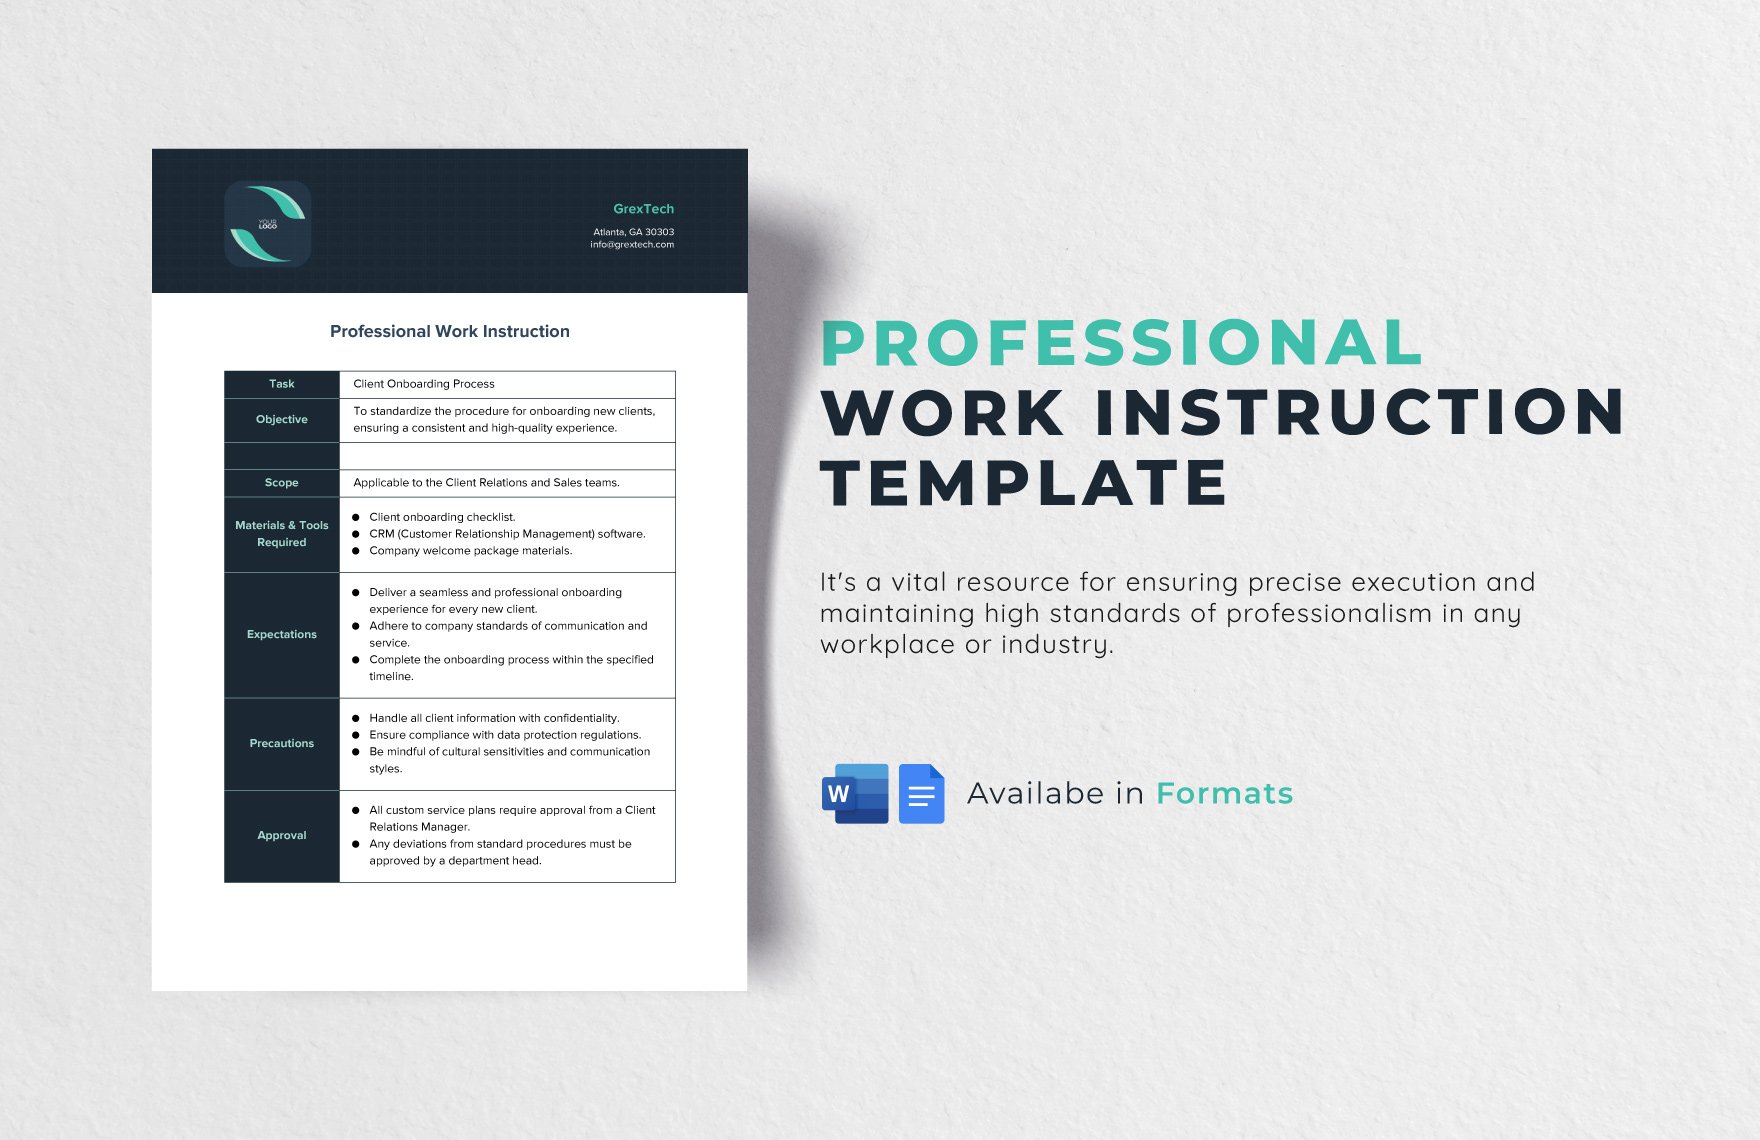 Professional Work Instruction Template